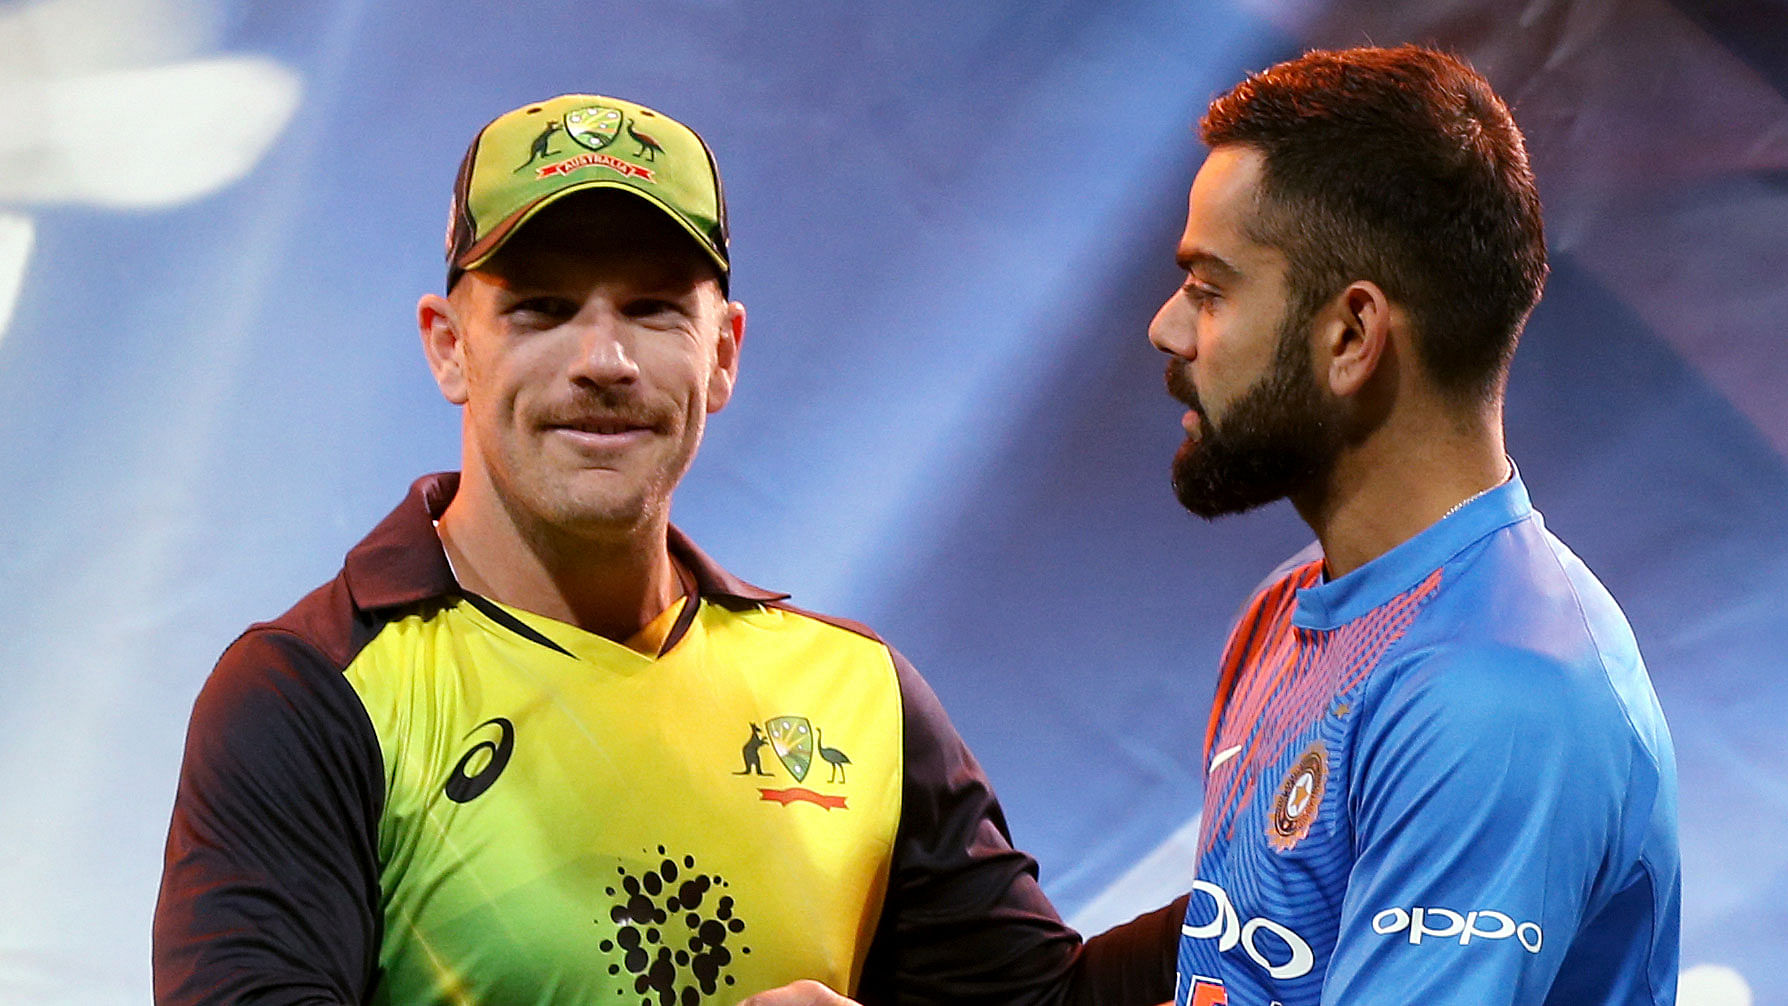 The 1-1 stalemate is a “fair reflection” of how India and Australia performed in the three-match T20 International series, said Virat Kohli.